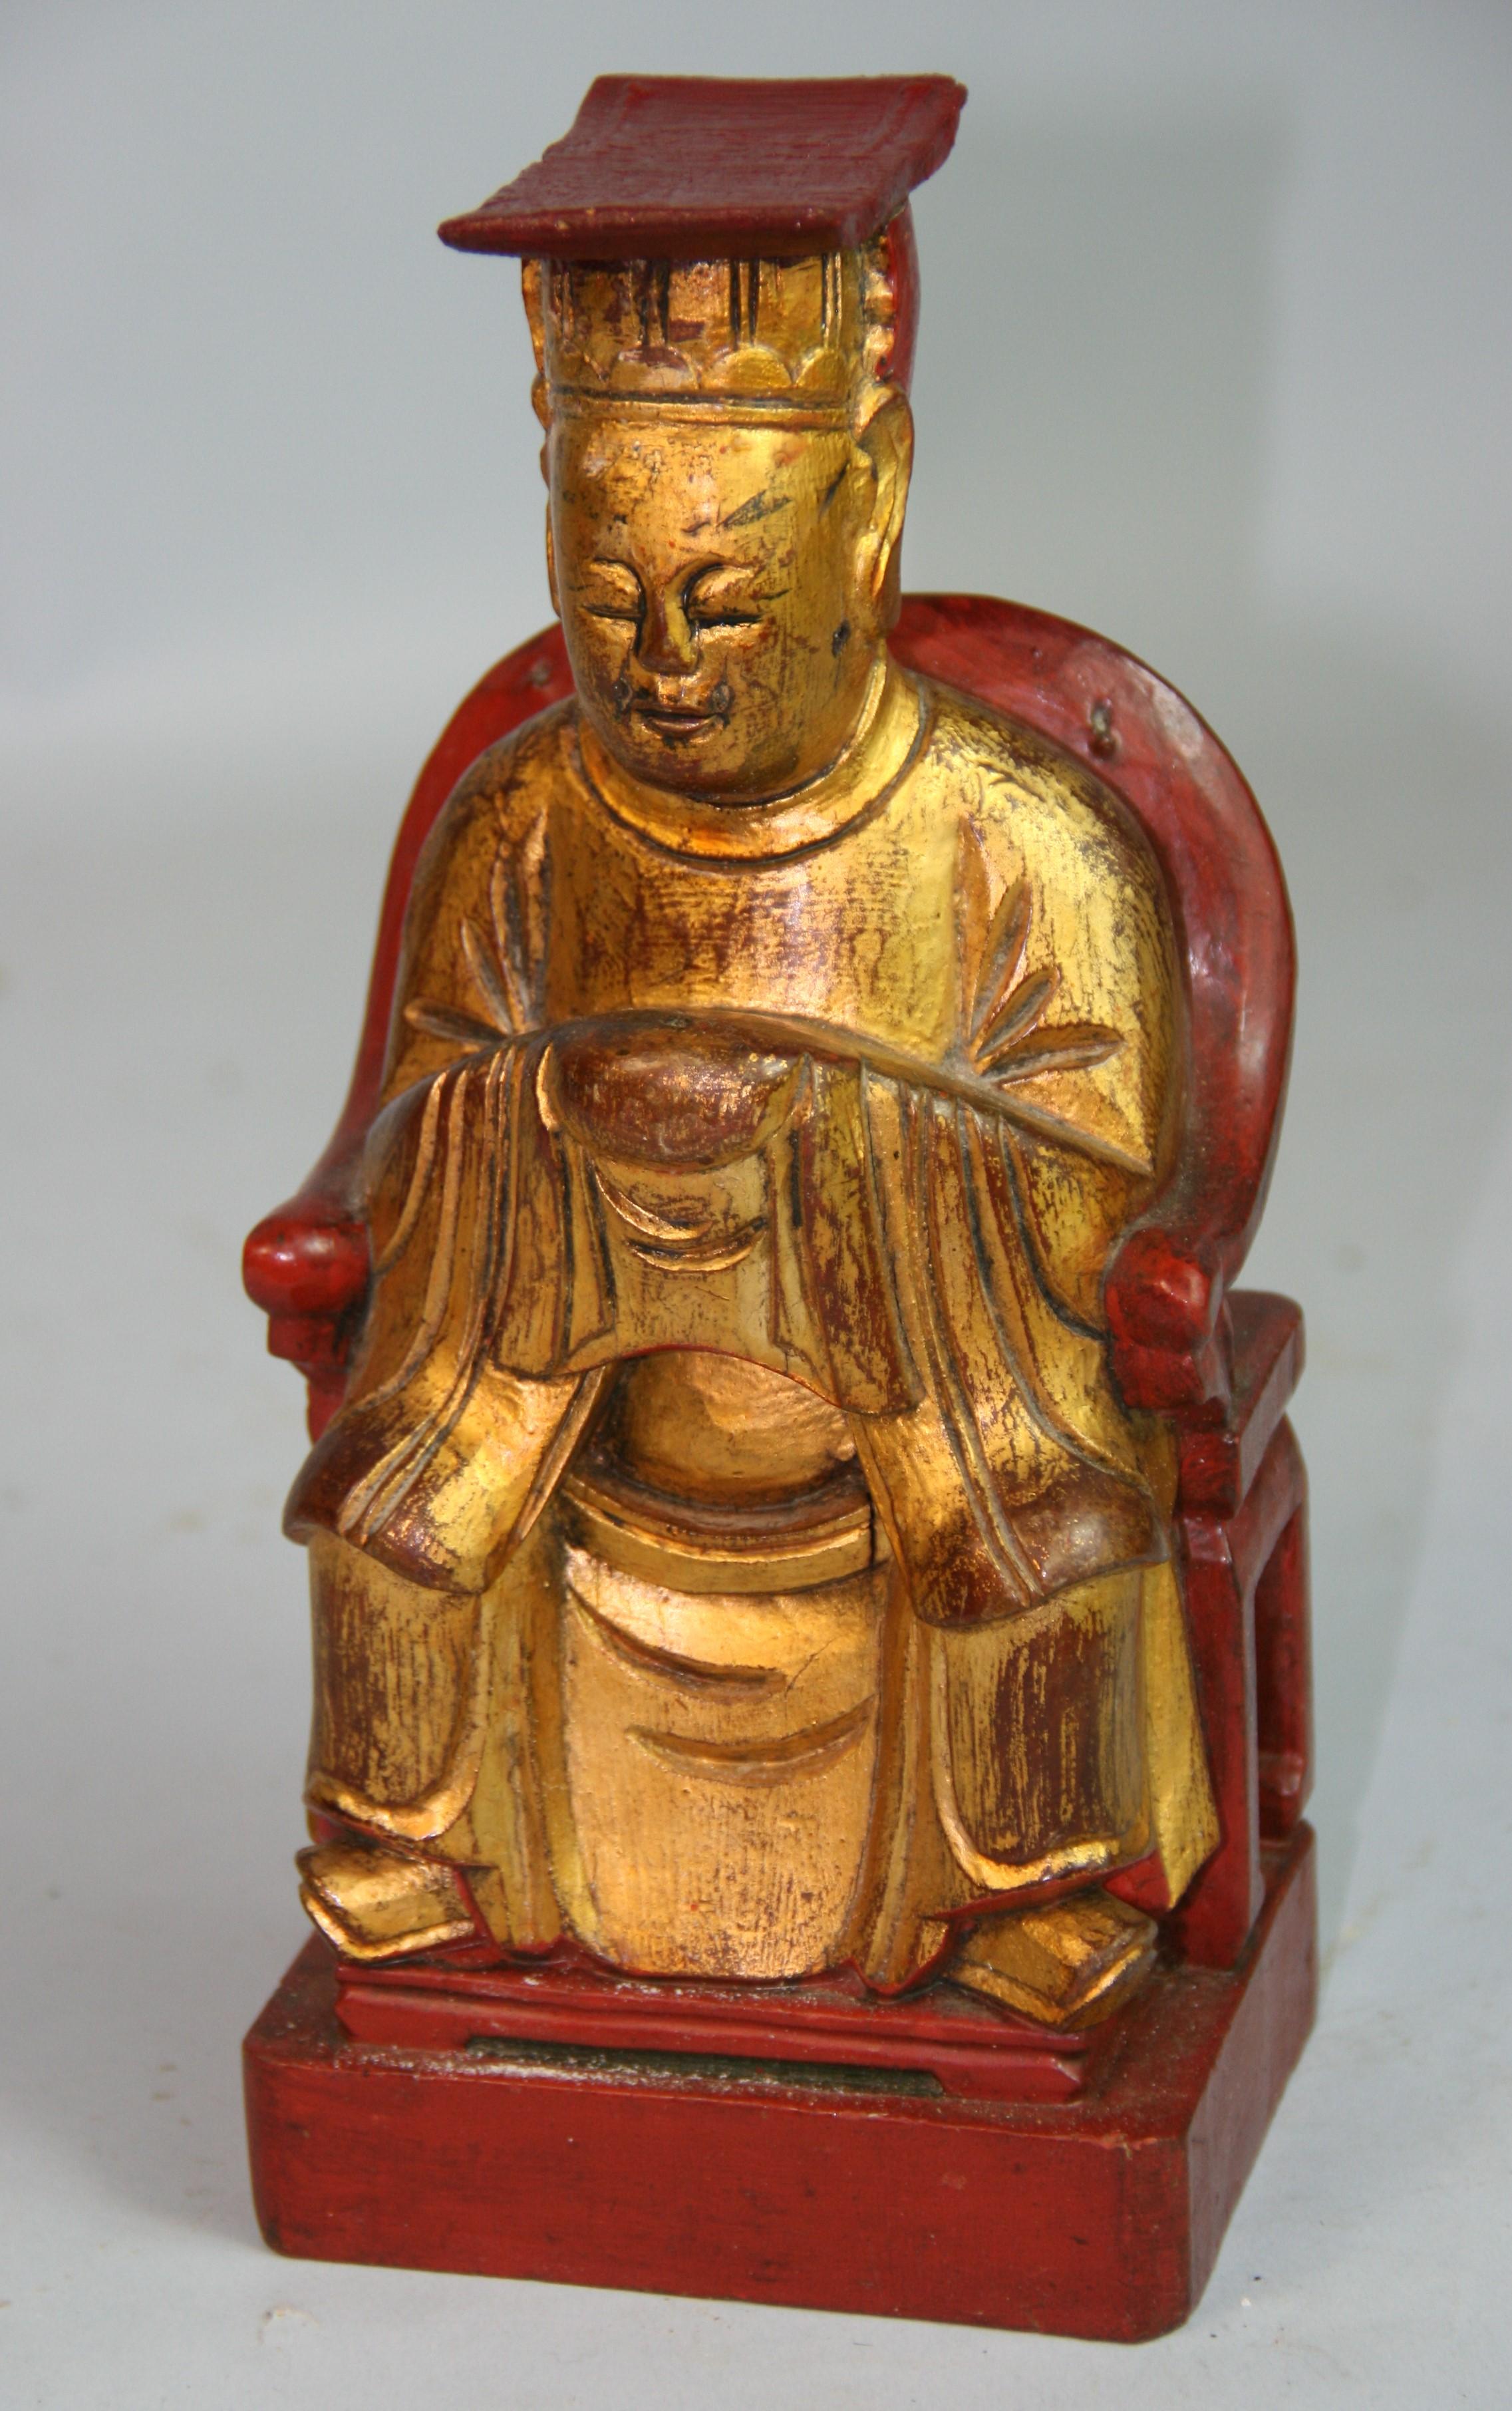 1492 Japanese gilt carved wood seated Buddha with hidden compartment in back